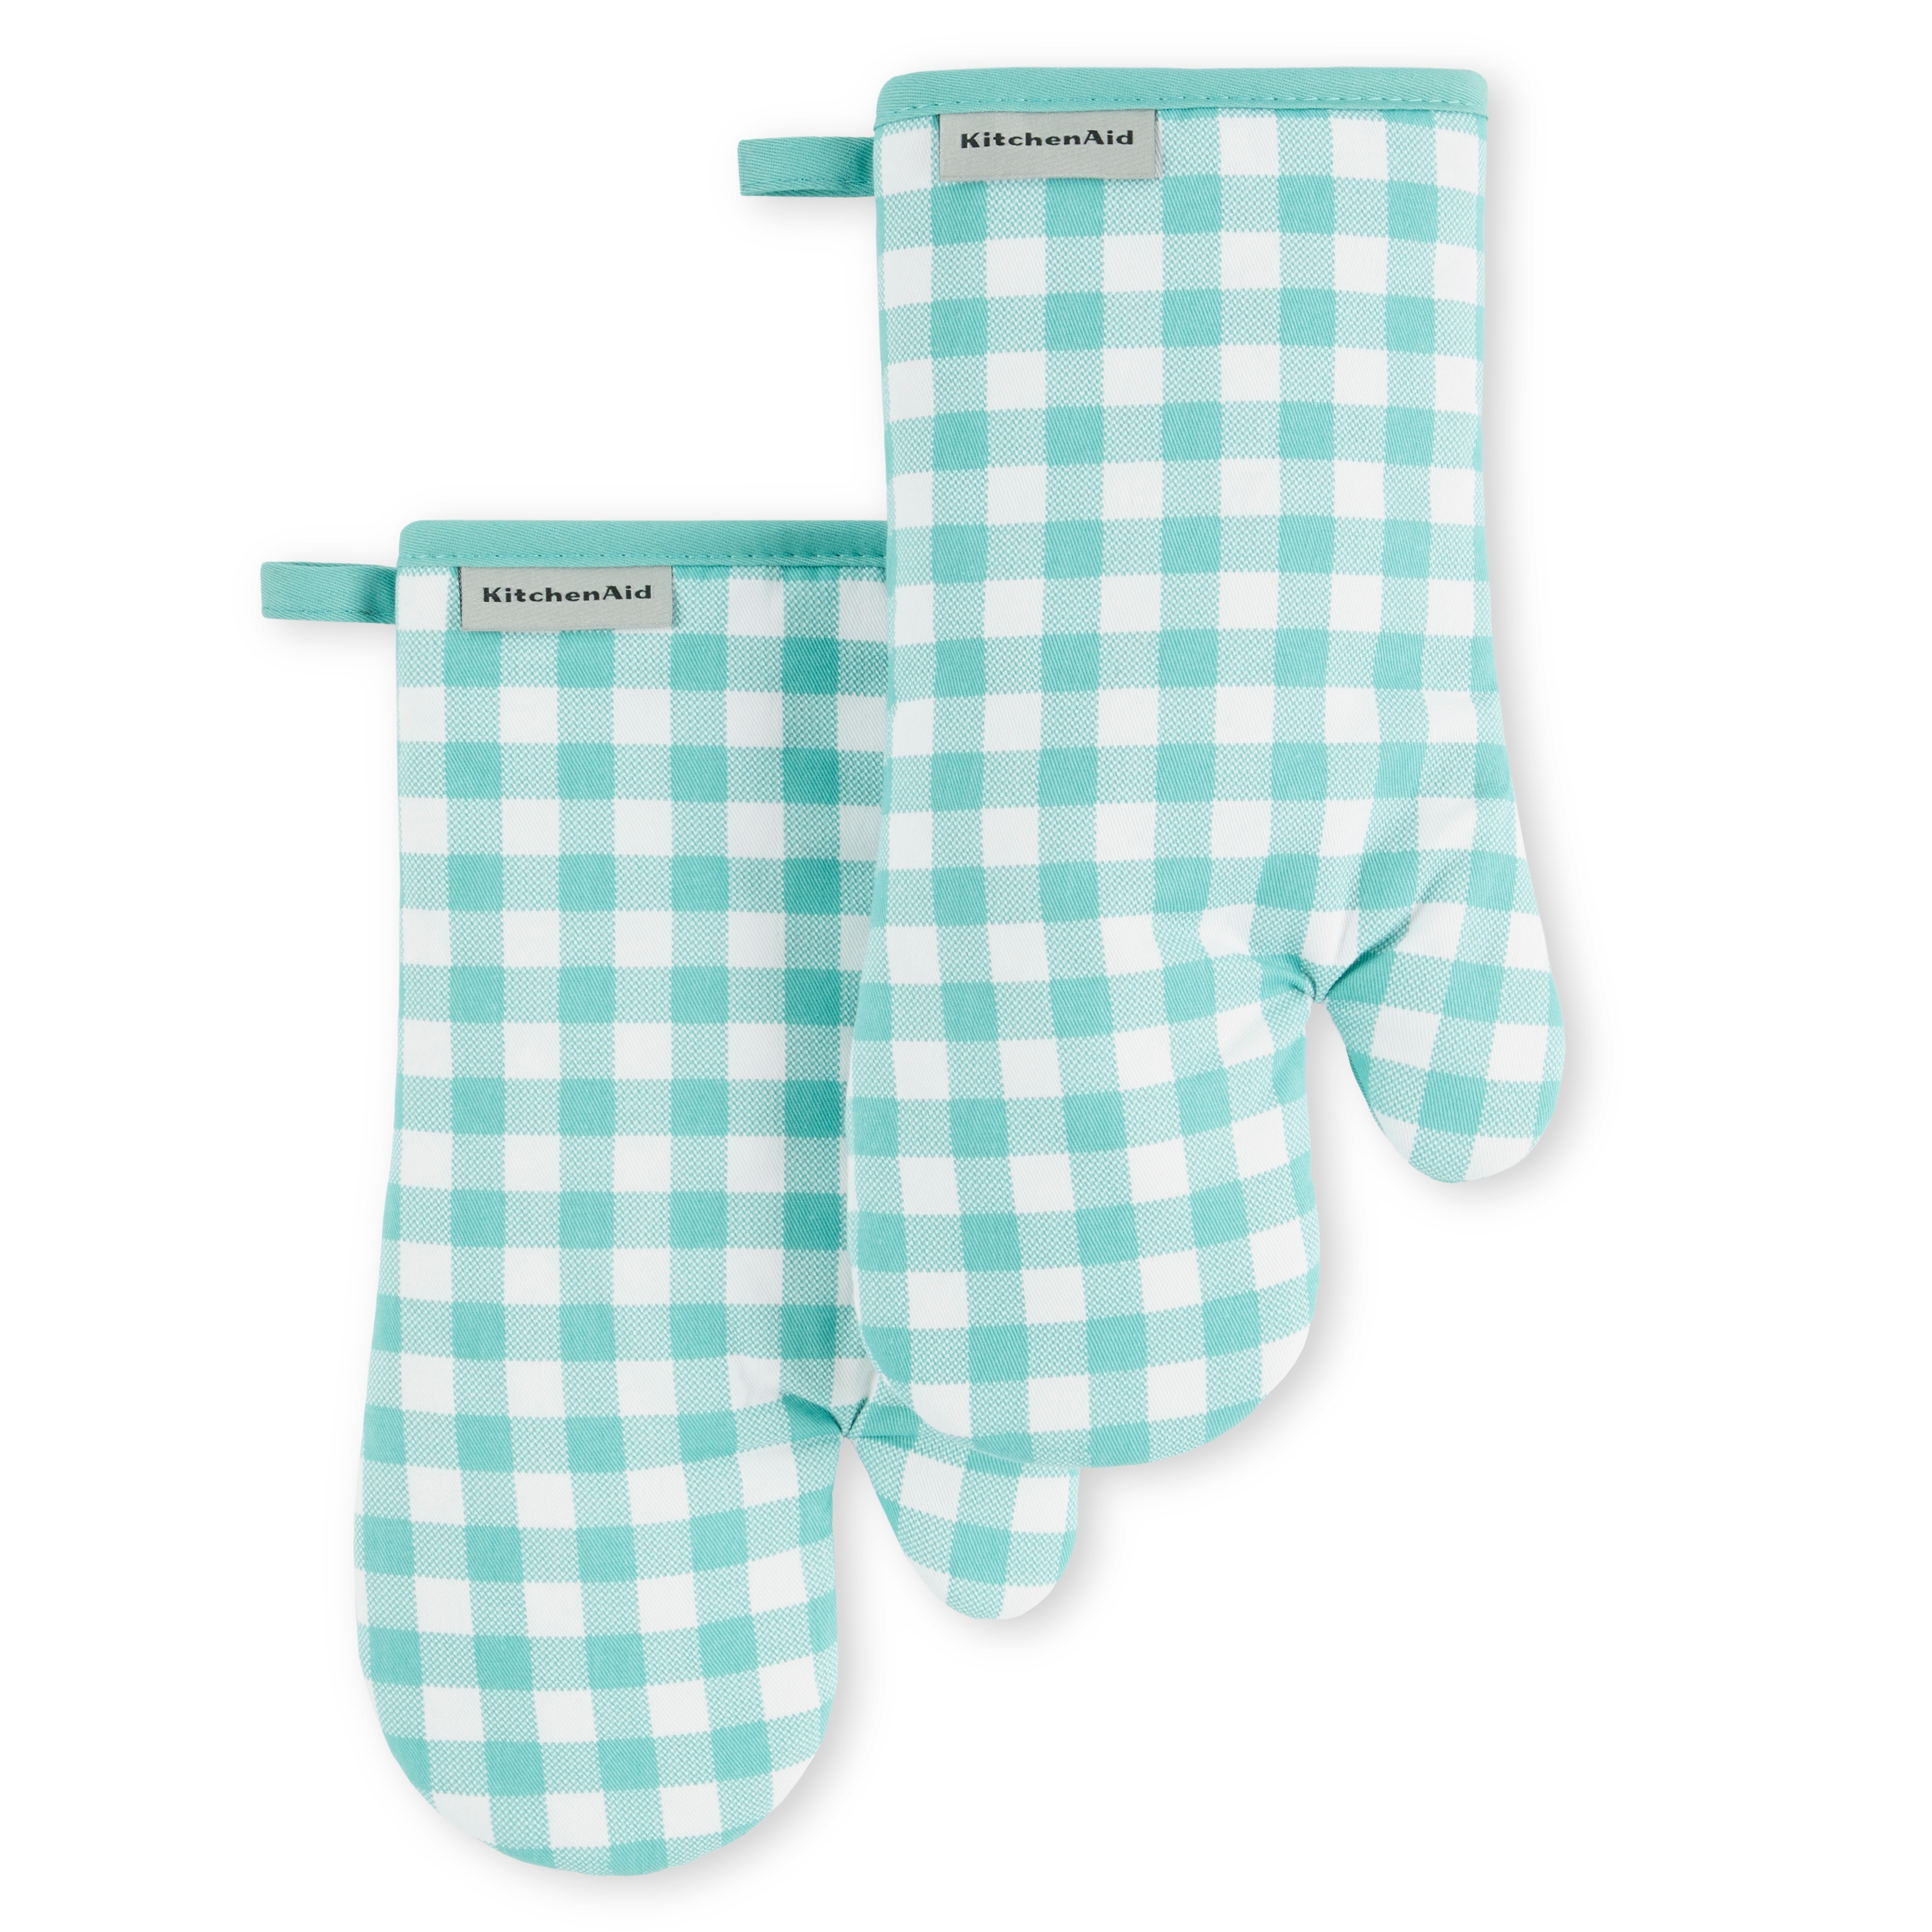 Fabstyles Solo Waffle Cotton Oven Mitt & Pot Holder Set of 4